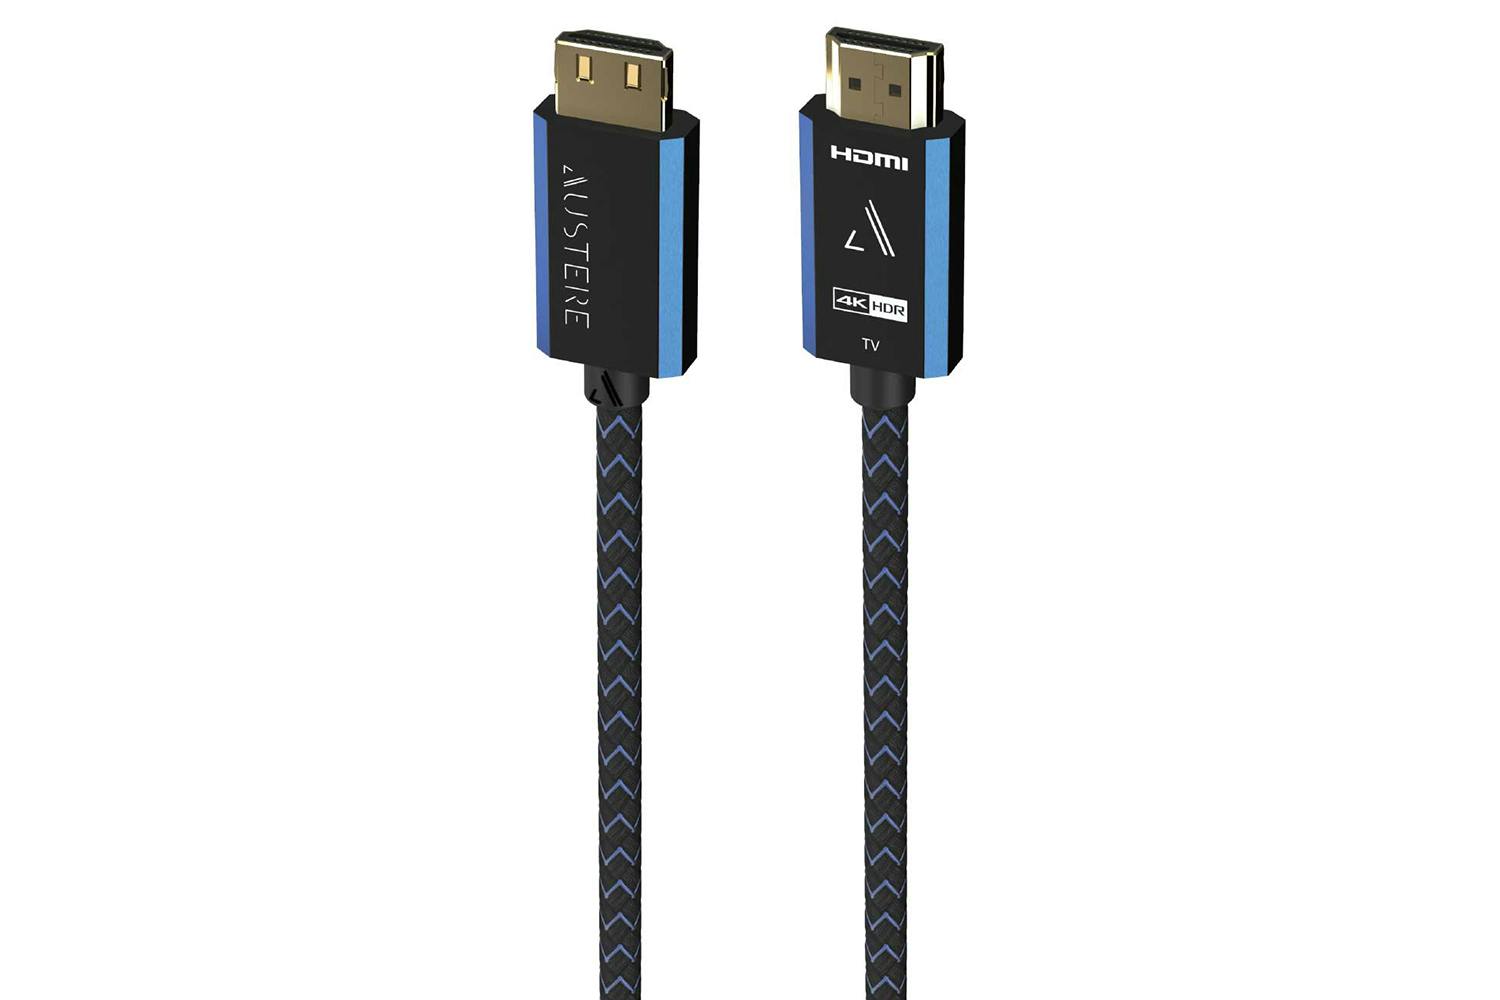 Austere V Series 4K Active HDMI Cable | 5m